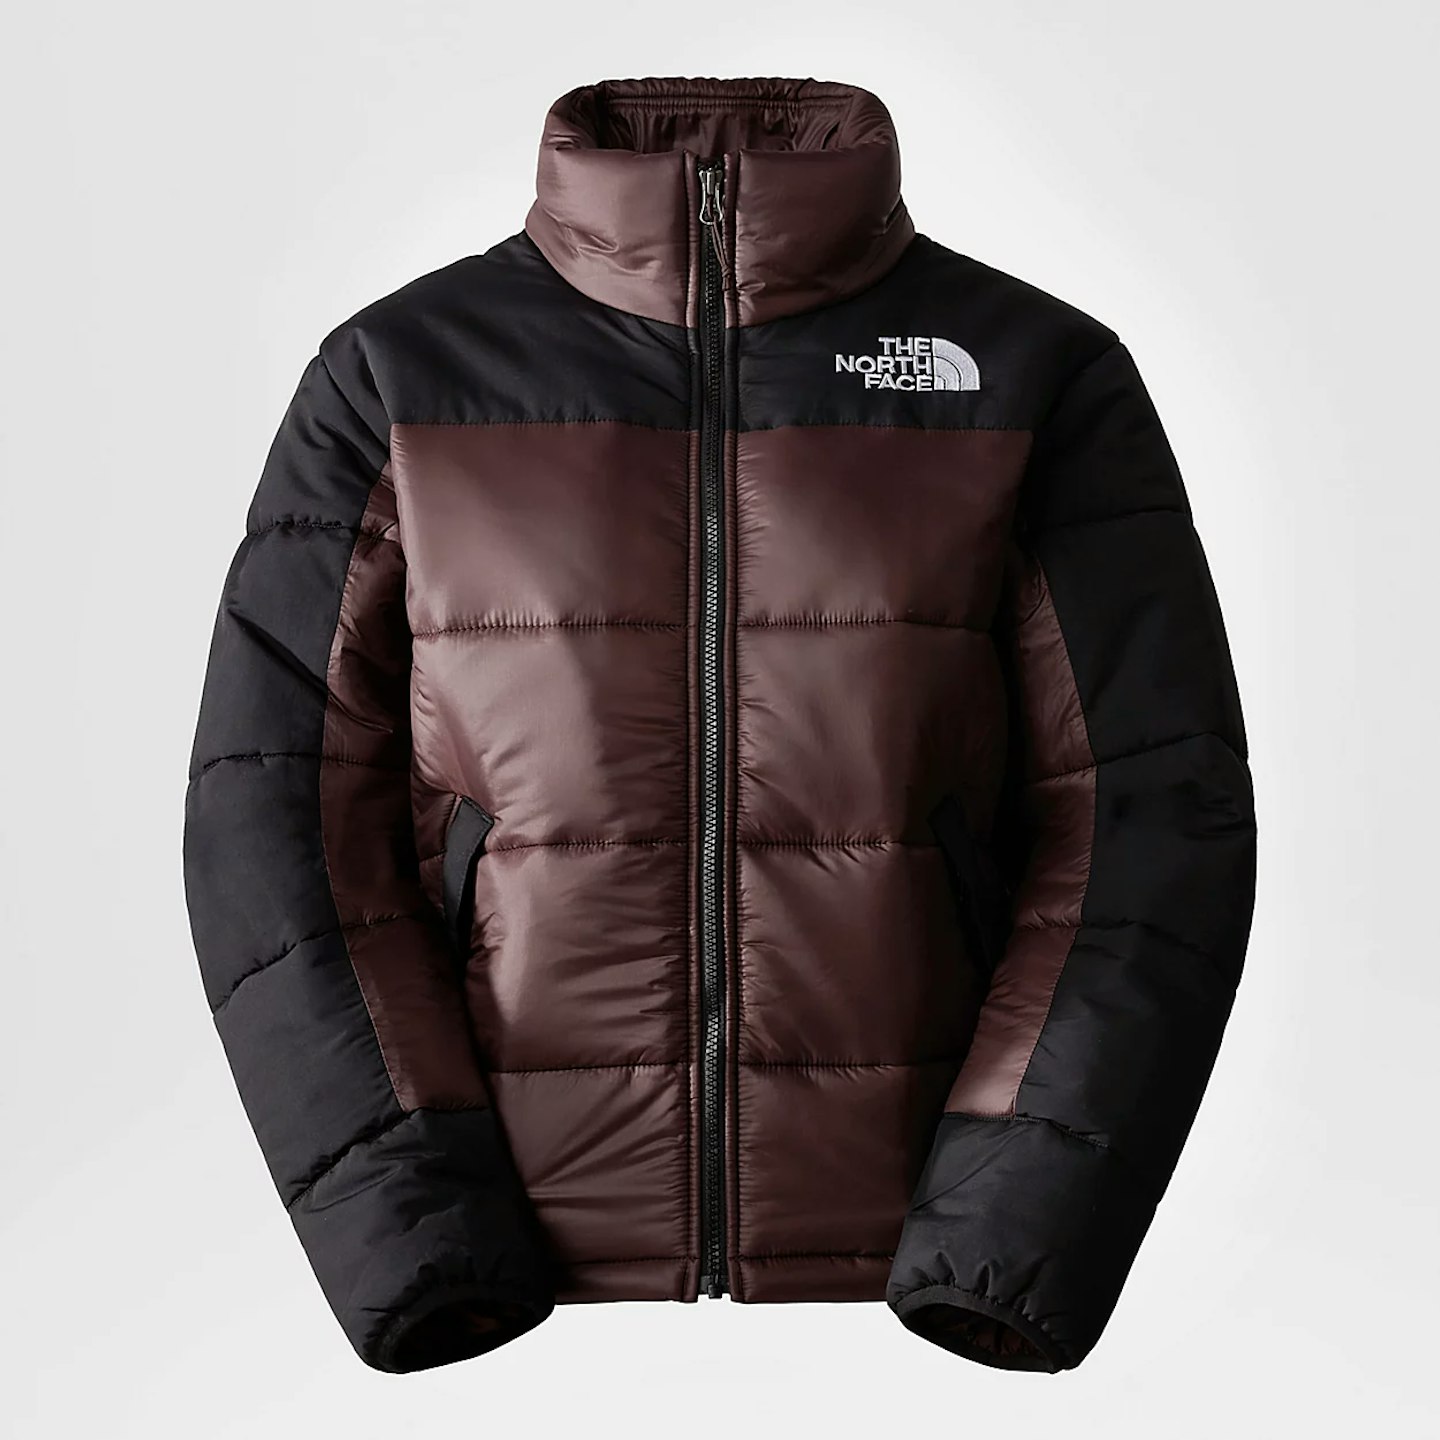 The North Face, Himalayan Insulated Jacket